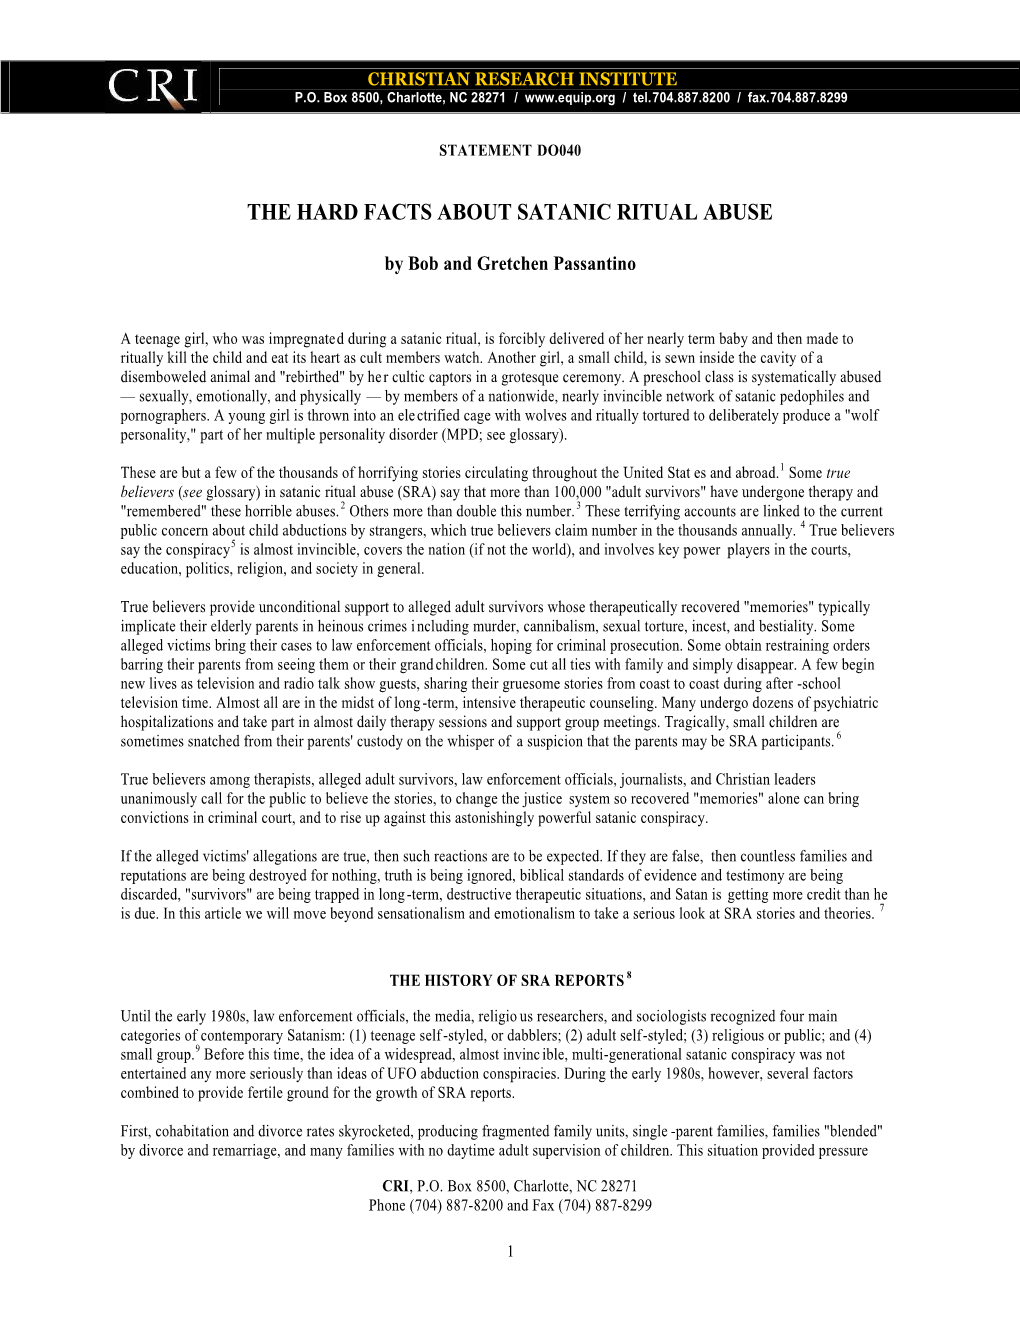 The Hard Facts About Satanic Ritual Abuse